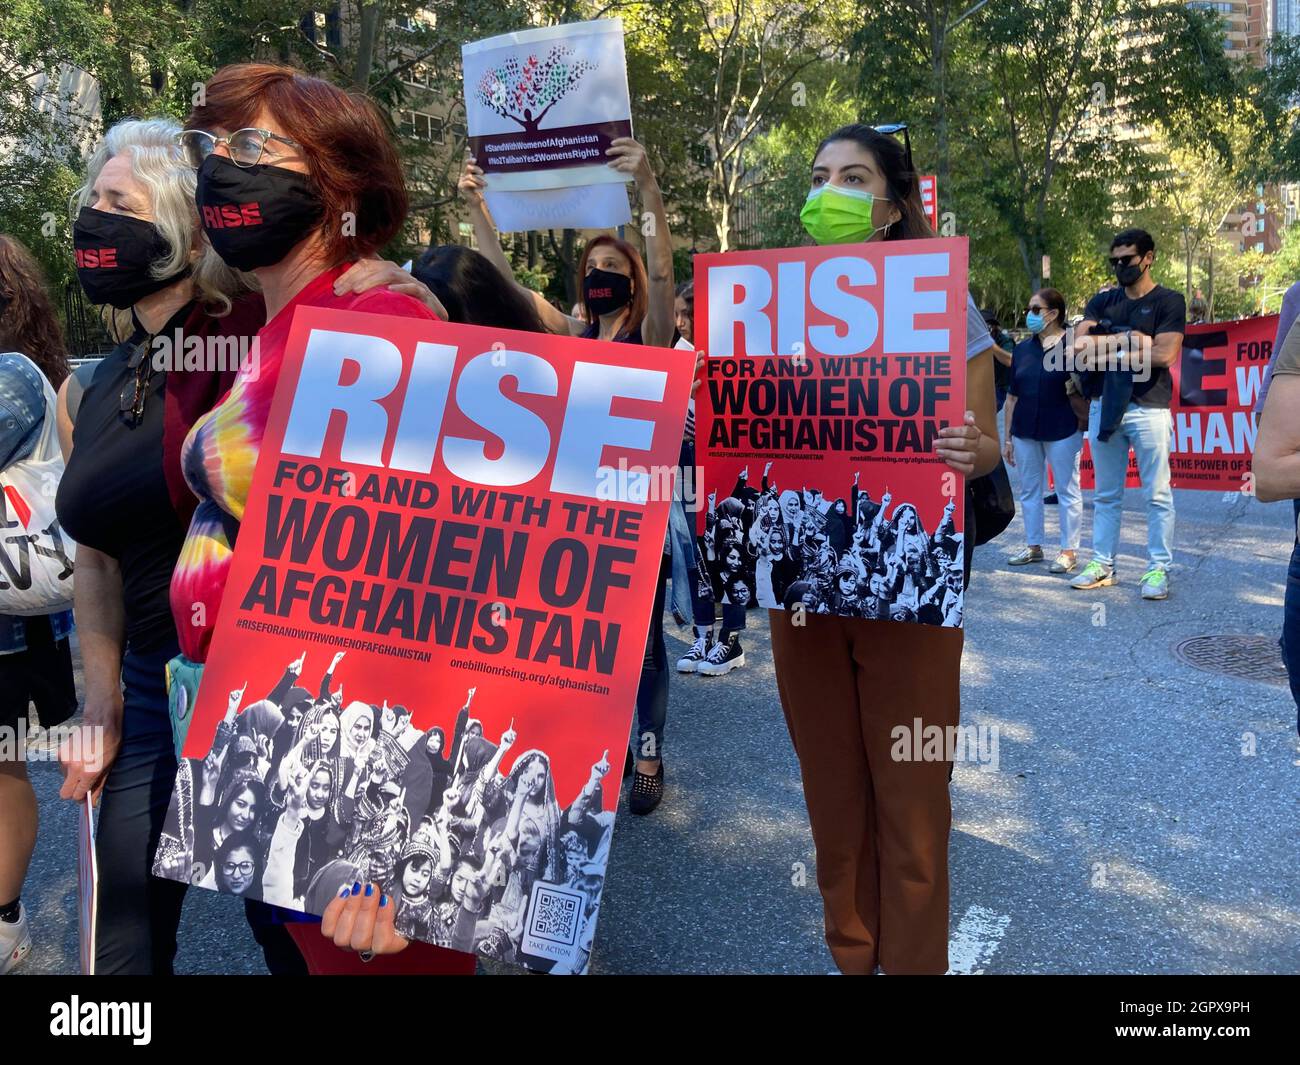 Activists protest the treatment of women by the Taliban in Afghanistan, in Dag Hammarskjold Plaza, in front of the United Nations, on Saturday, September 25, 2021. (© Frances M. Roberts) Stock Photo